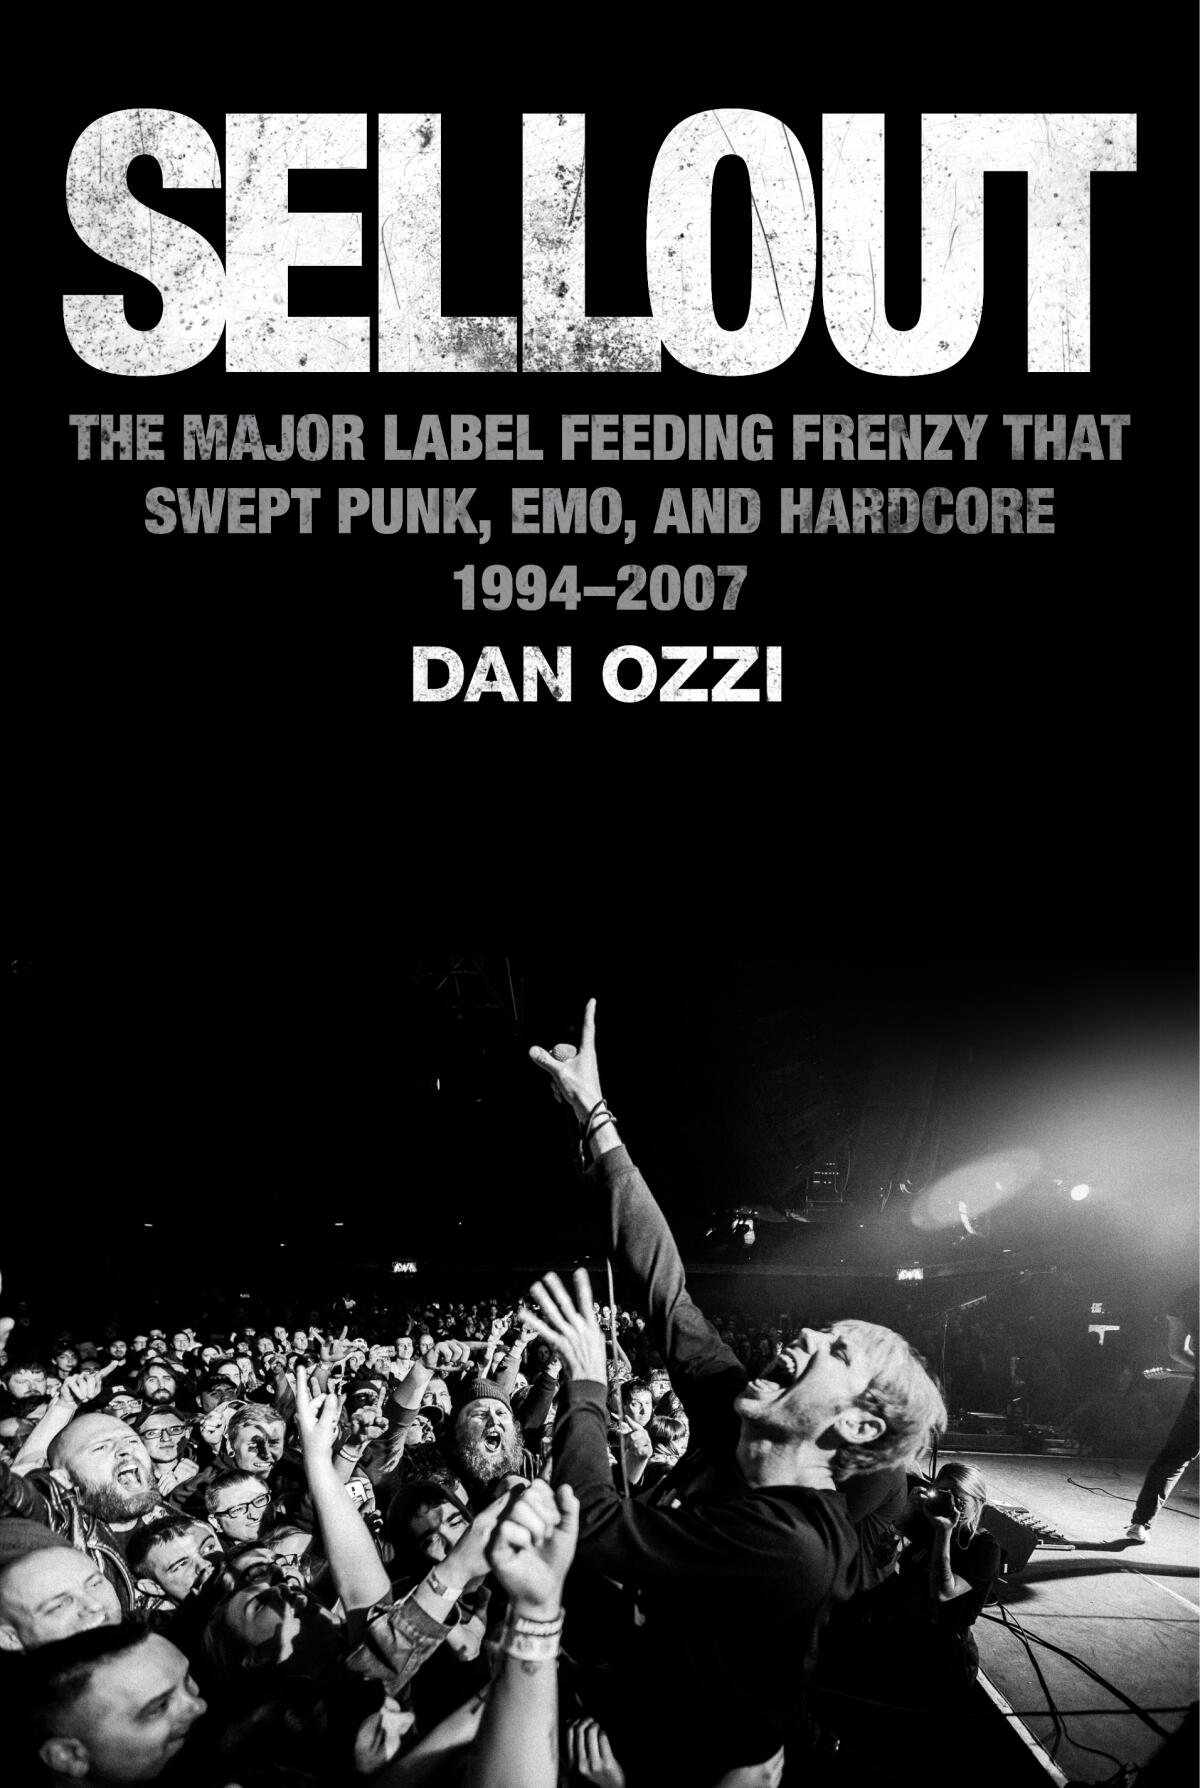 A singer performs in front of a rowdy crowd on the cover of the book "Sellout."